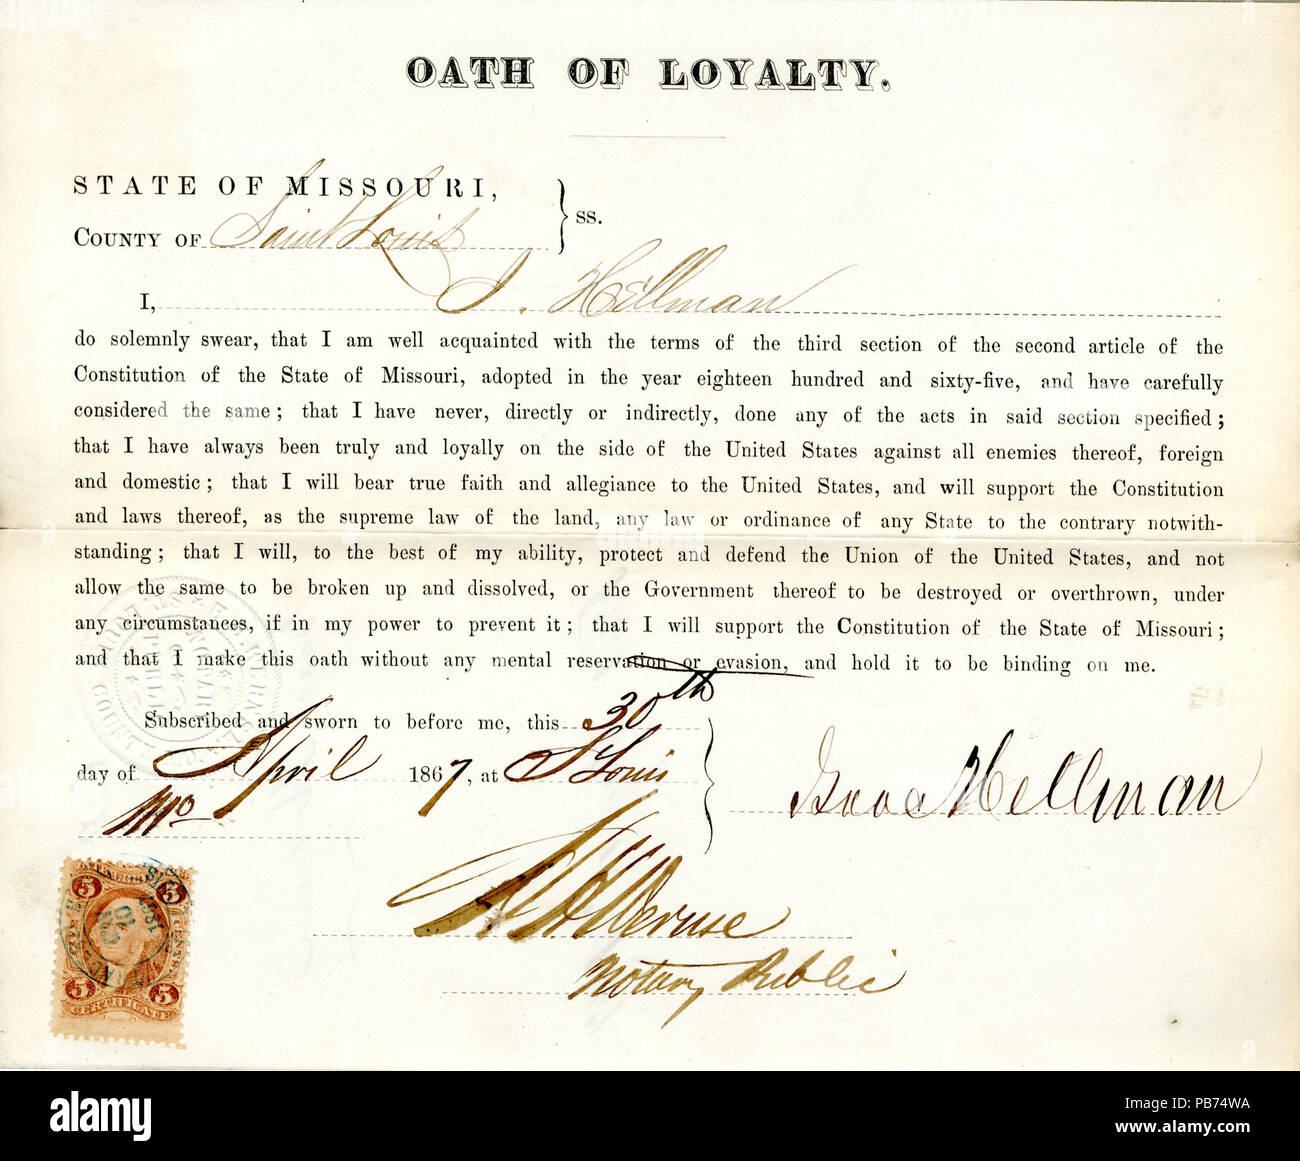 949 Loyalty oath of Isaac Hellman of Missouri, County of St. Louis Stock Photo